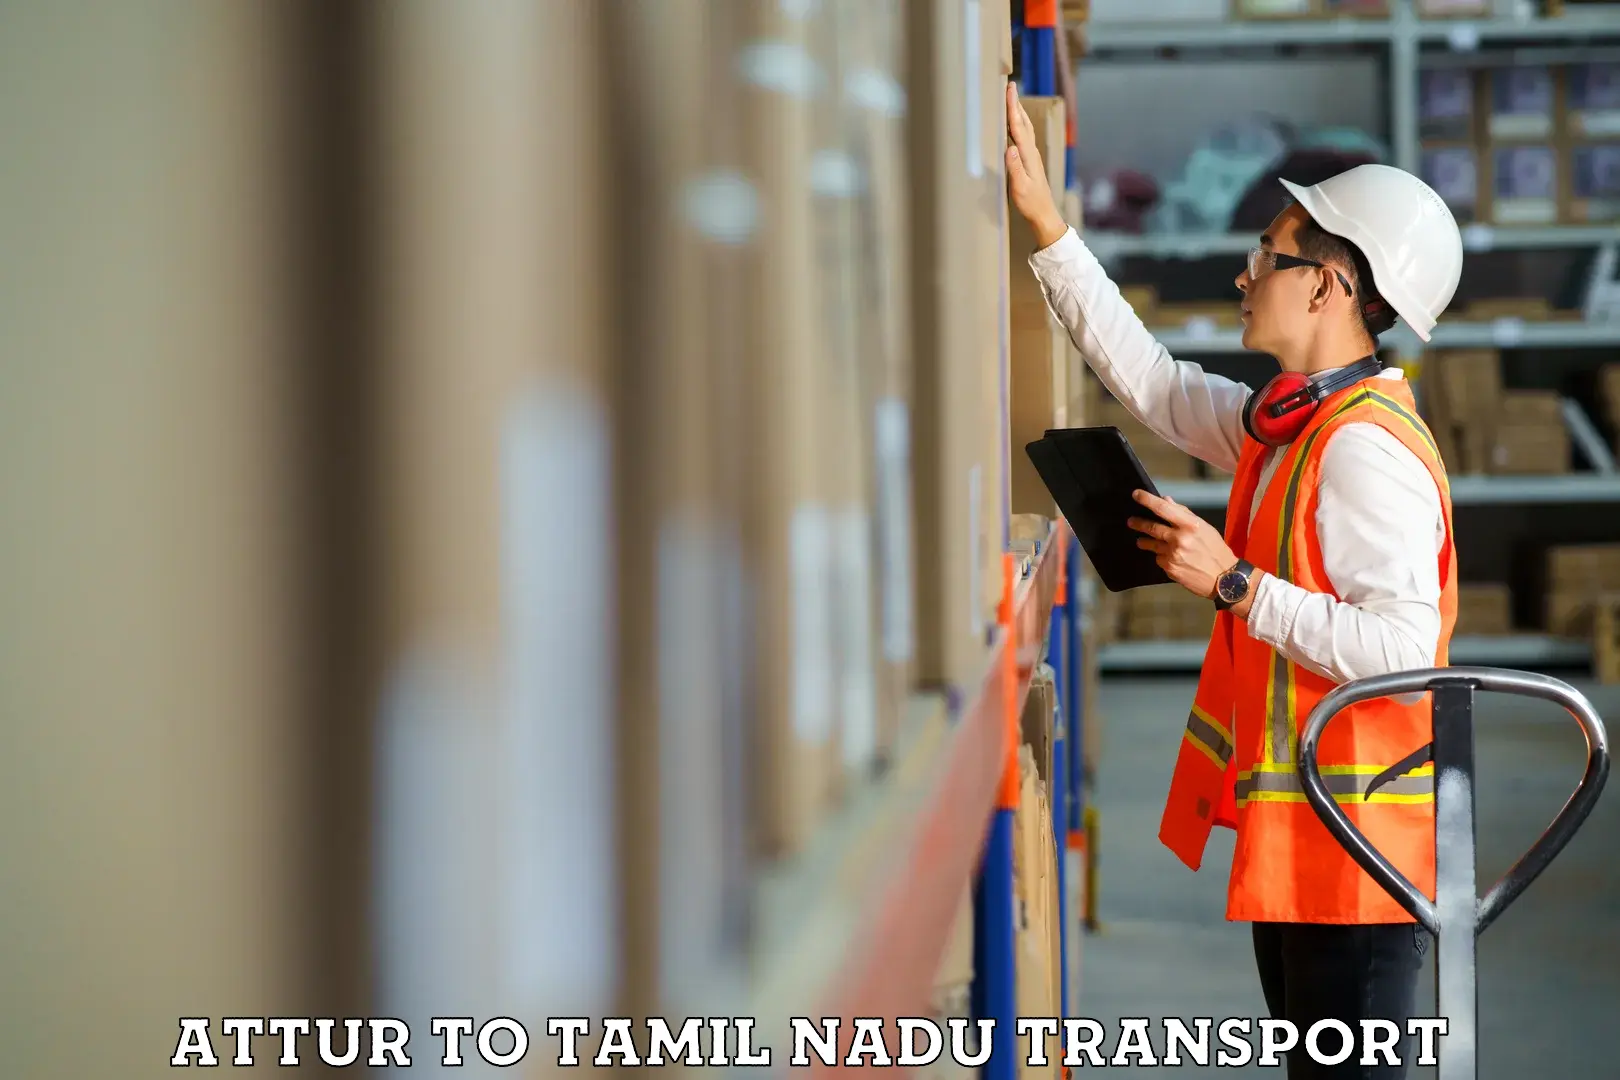 Goods delivery service Attur to Tindivanam